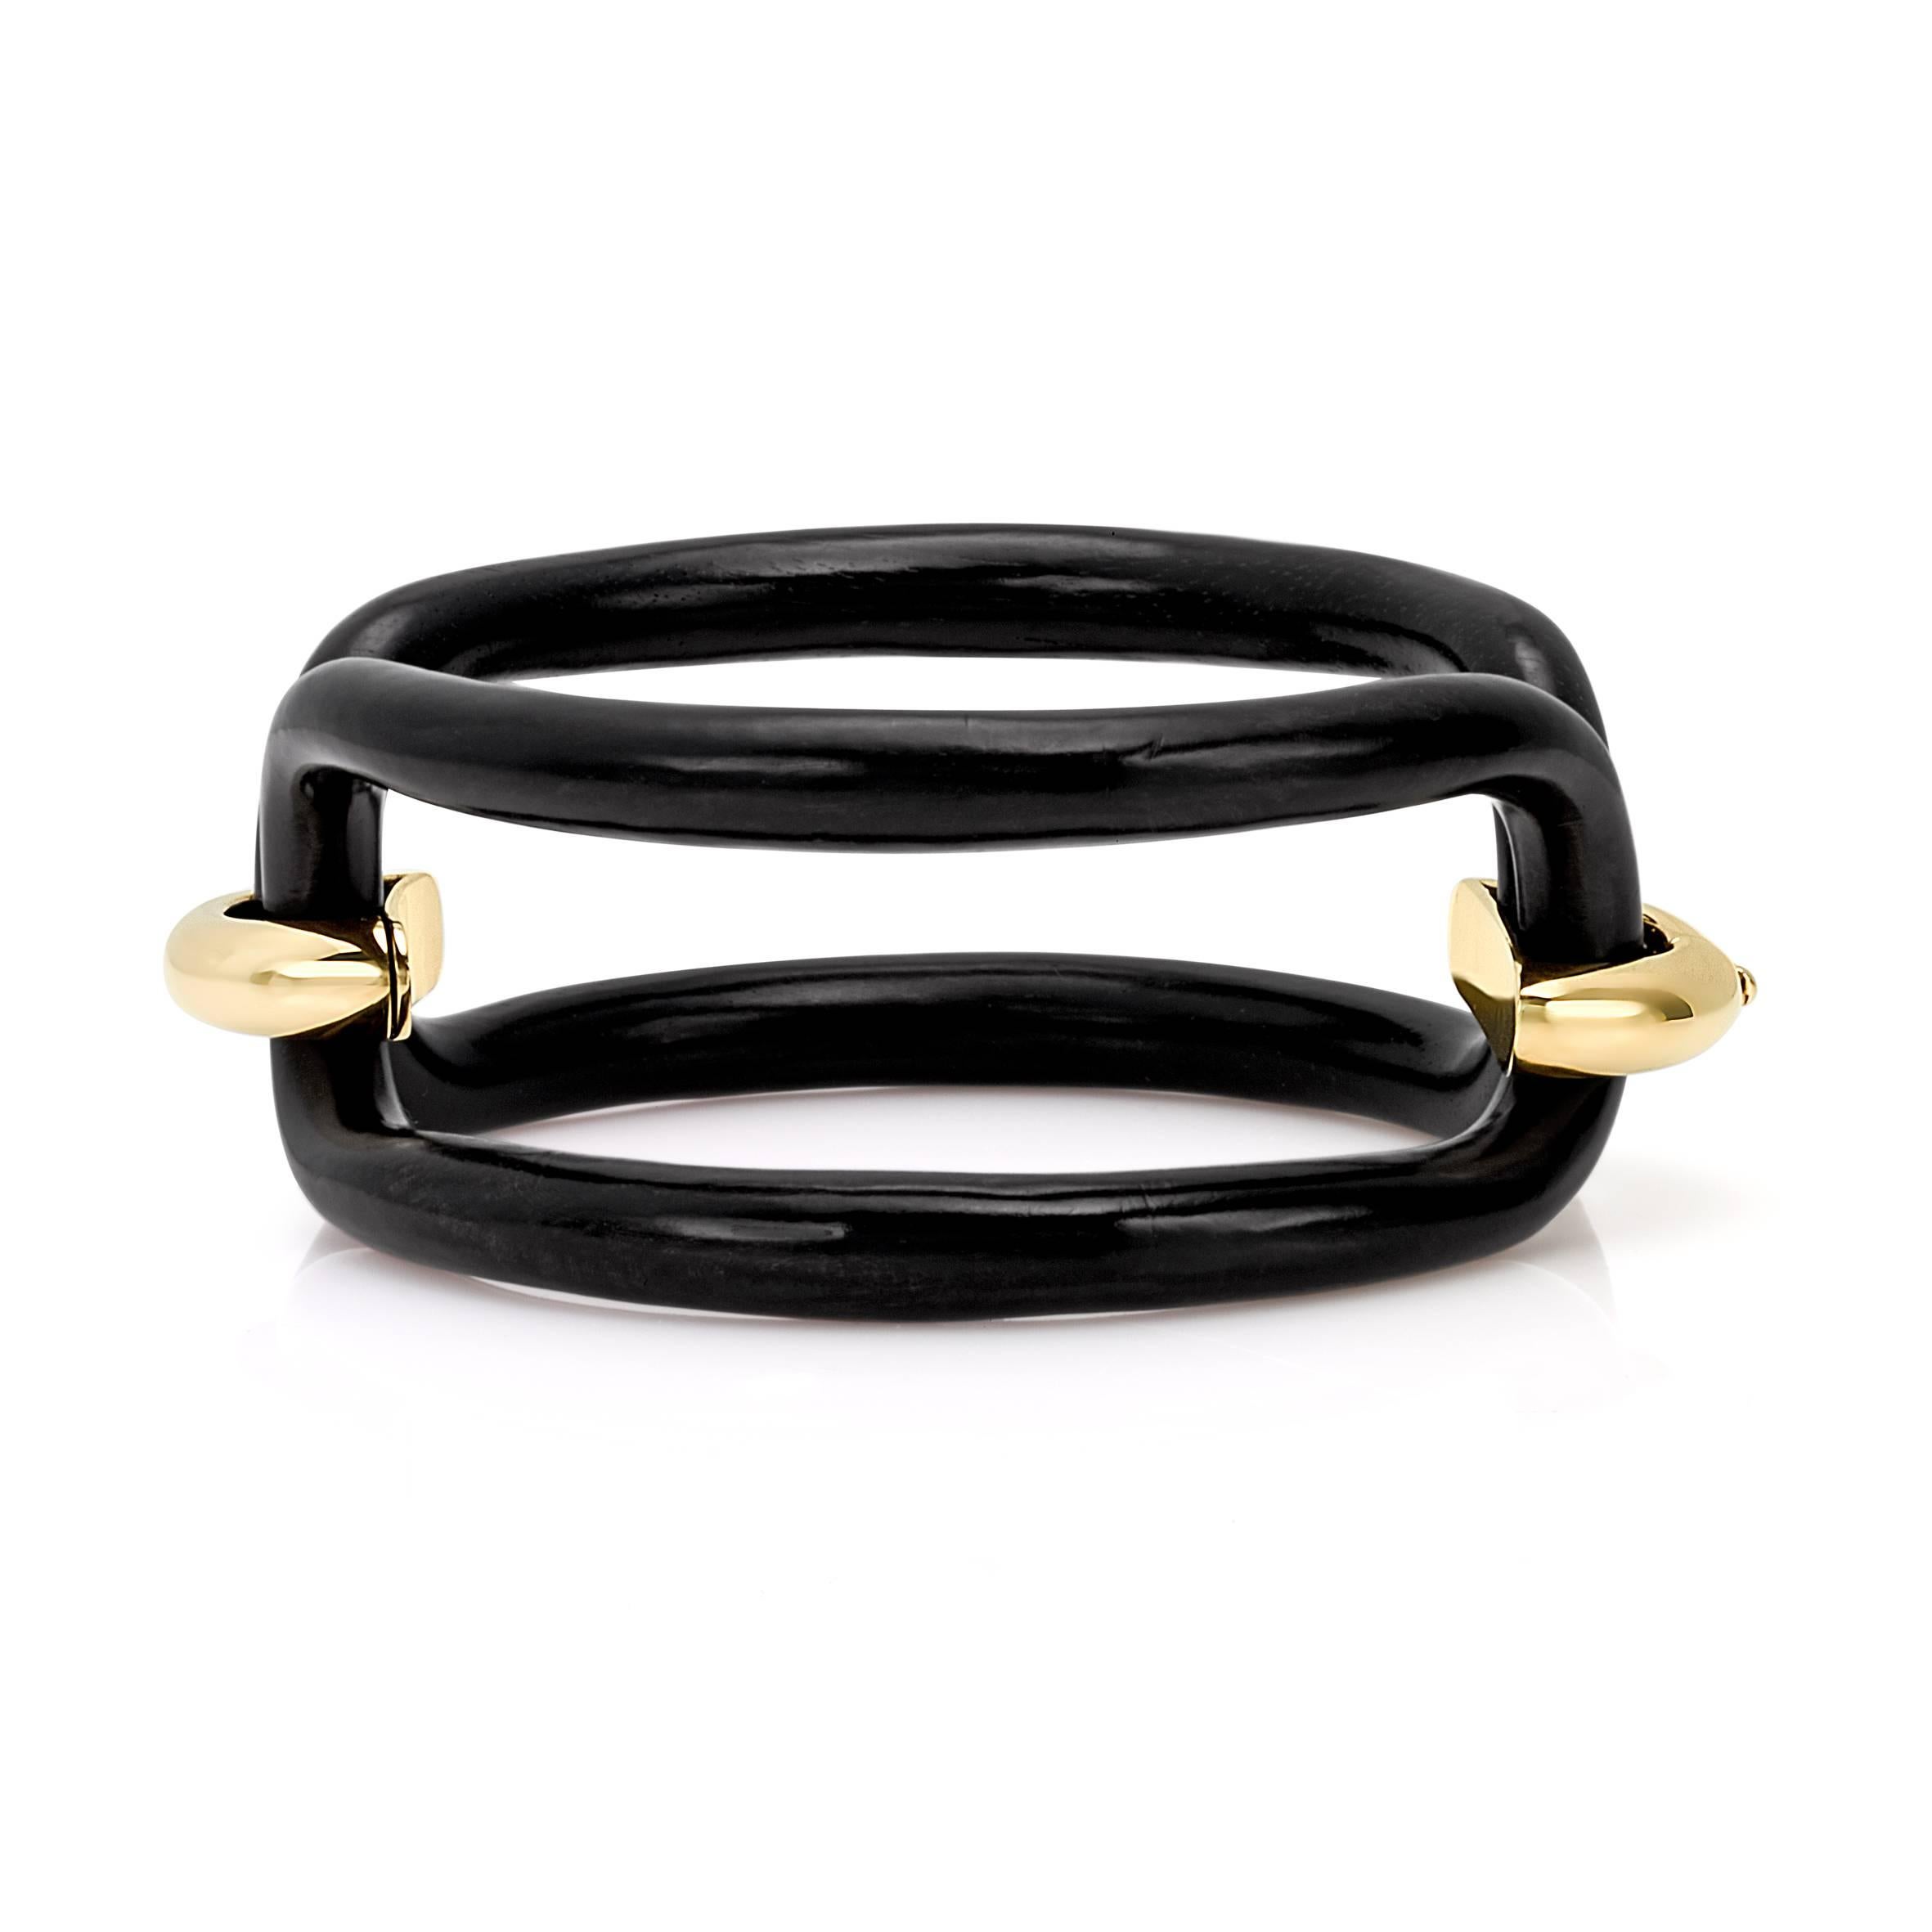 Roberta collection bangle in 18 kt  yellow gold and ebony
The newest and more popular collection of his year

the total weight of the gold is  gr 12.70

STAMP: 10 MI ITALY 750
